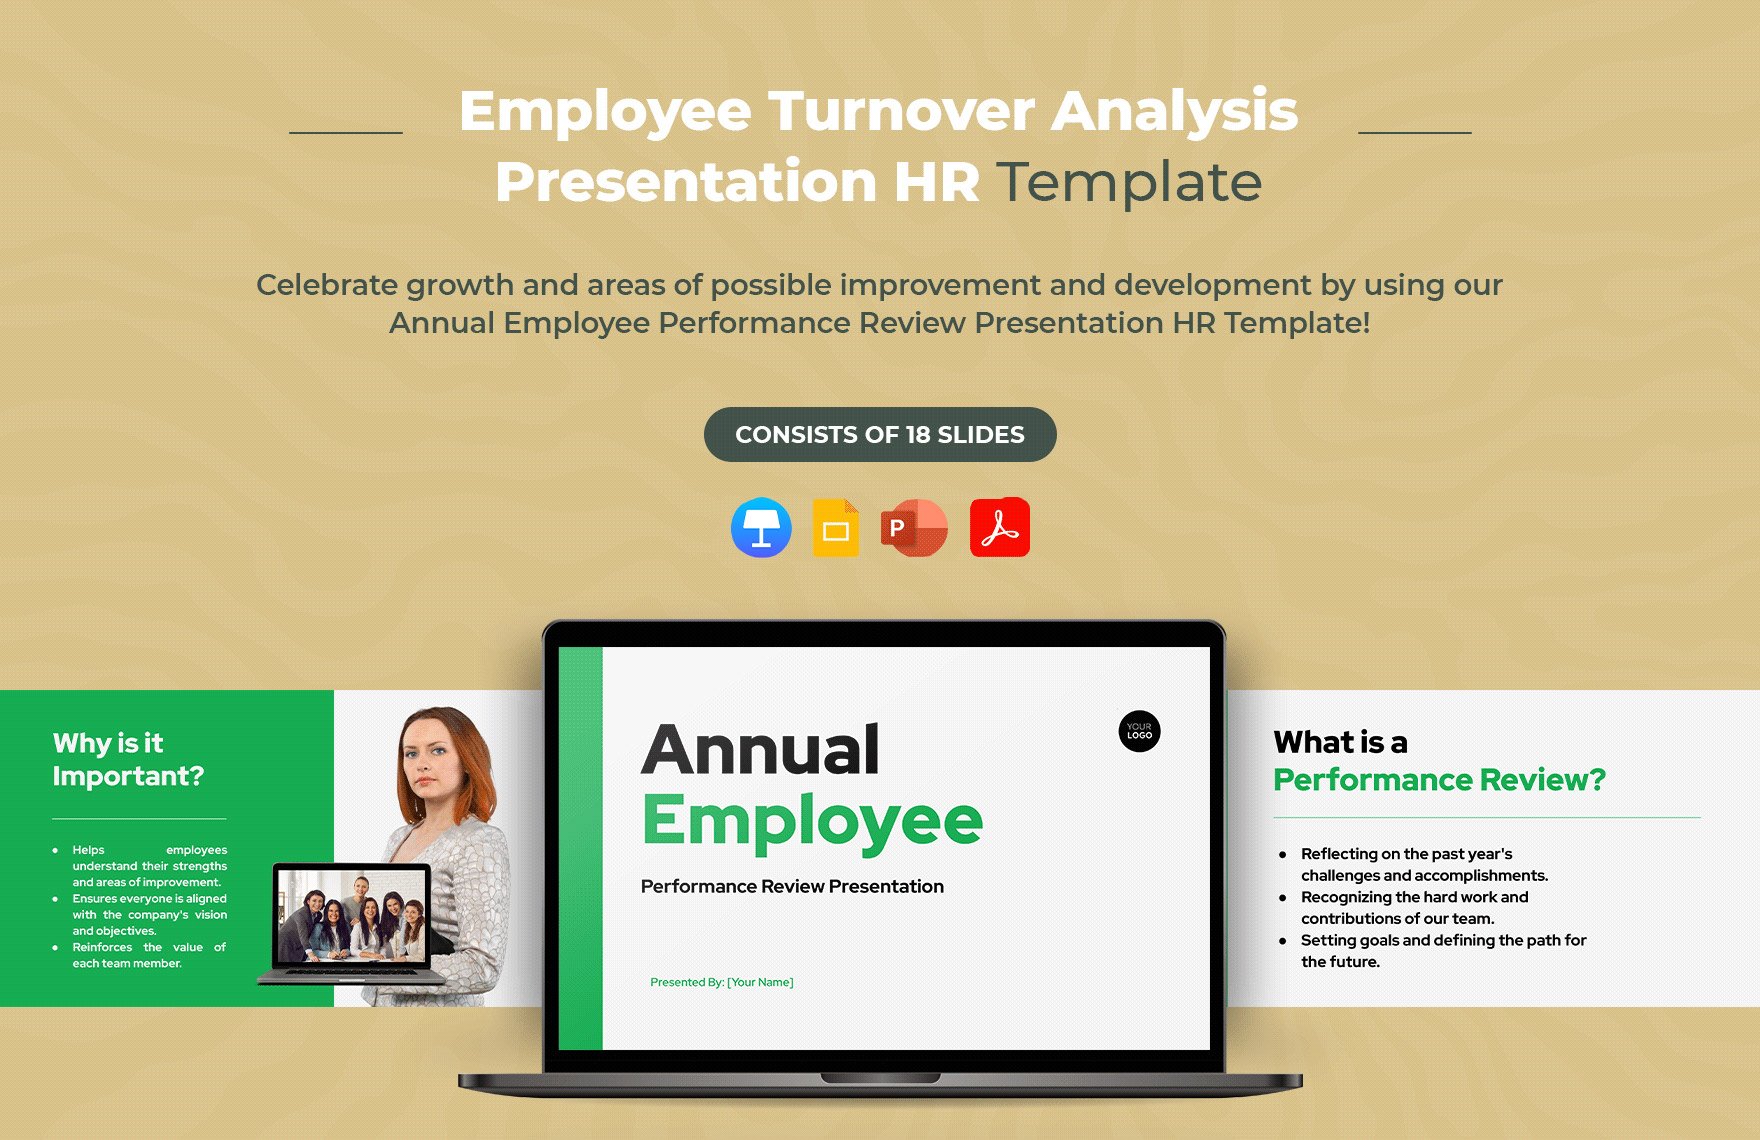 Annual Employee Performance Review Presentation HR Template